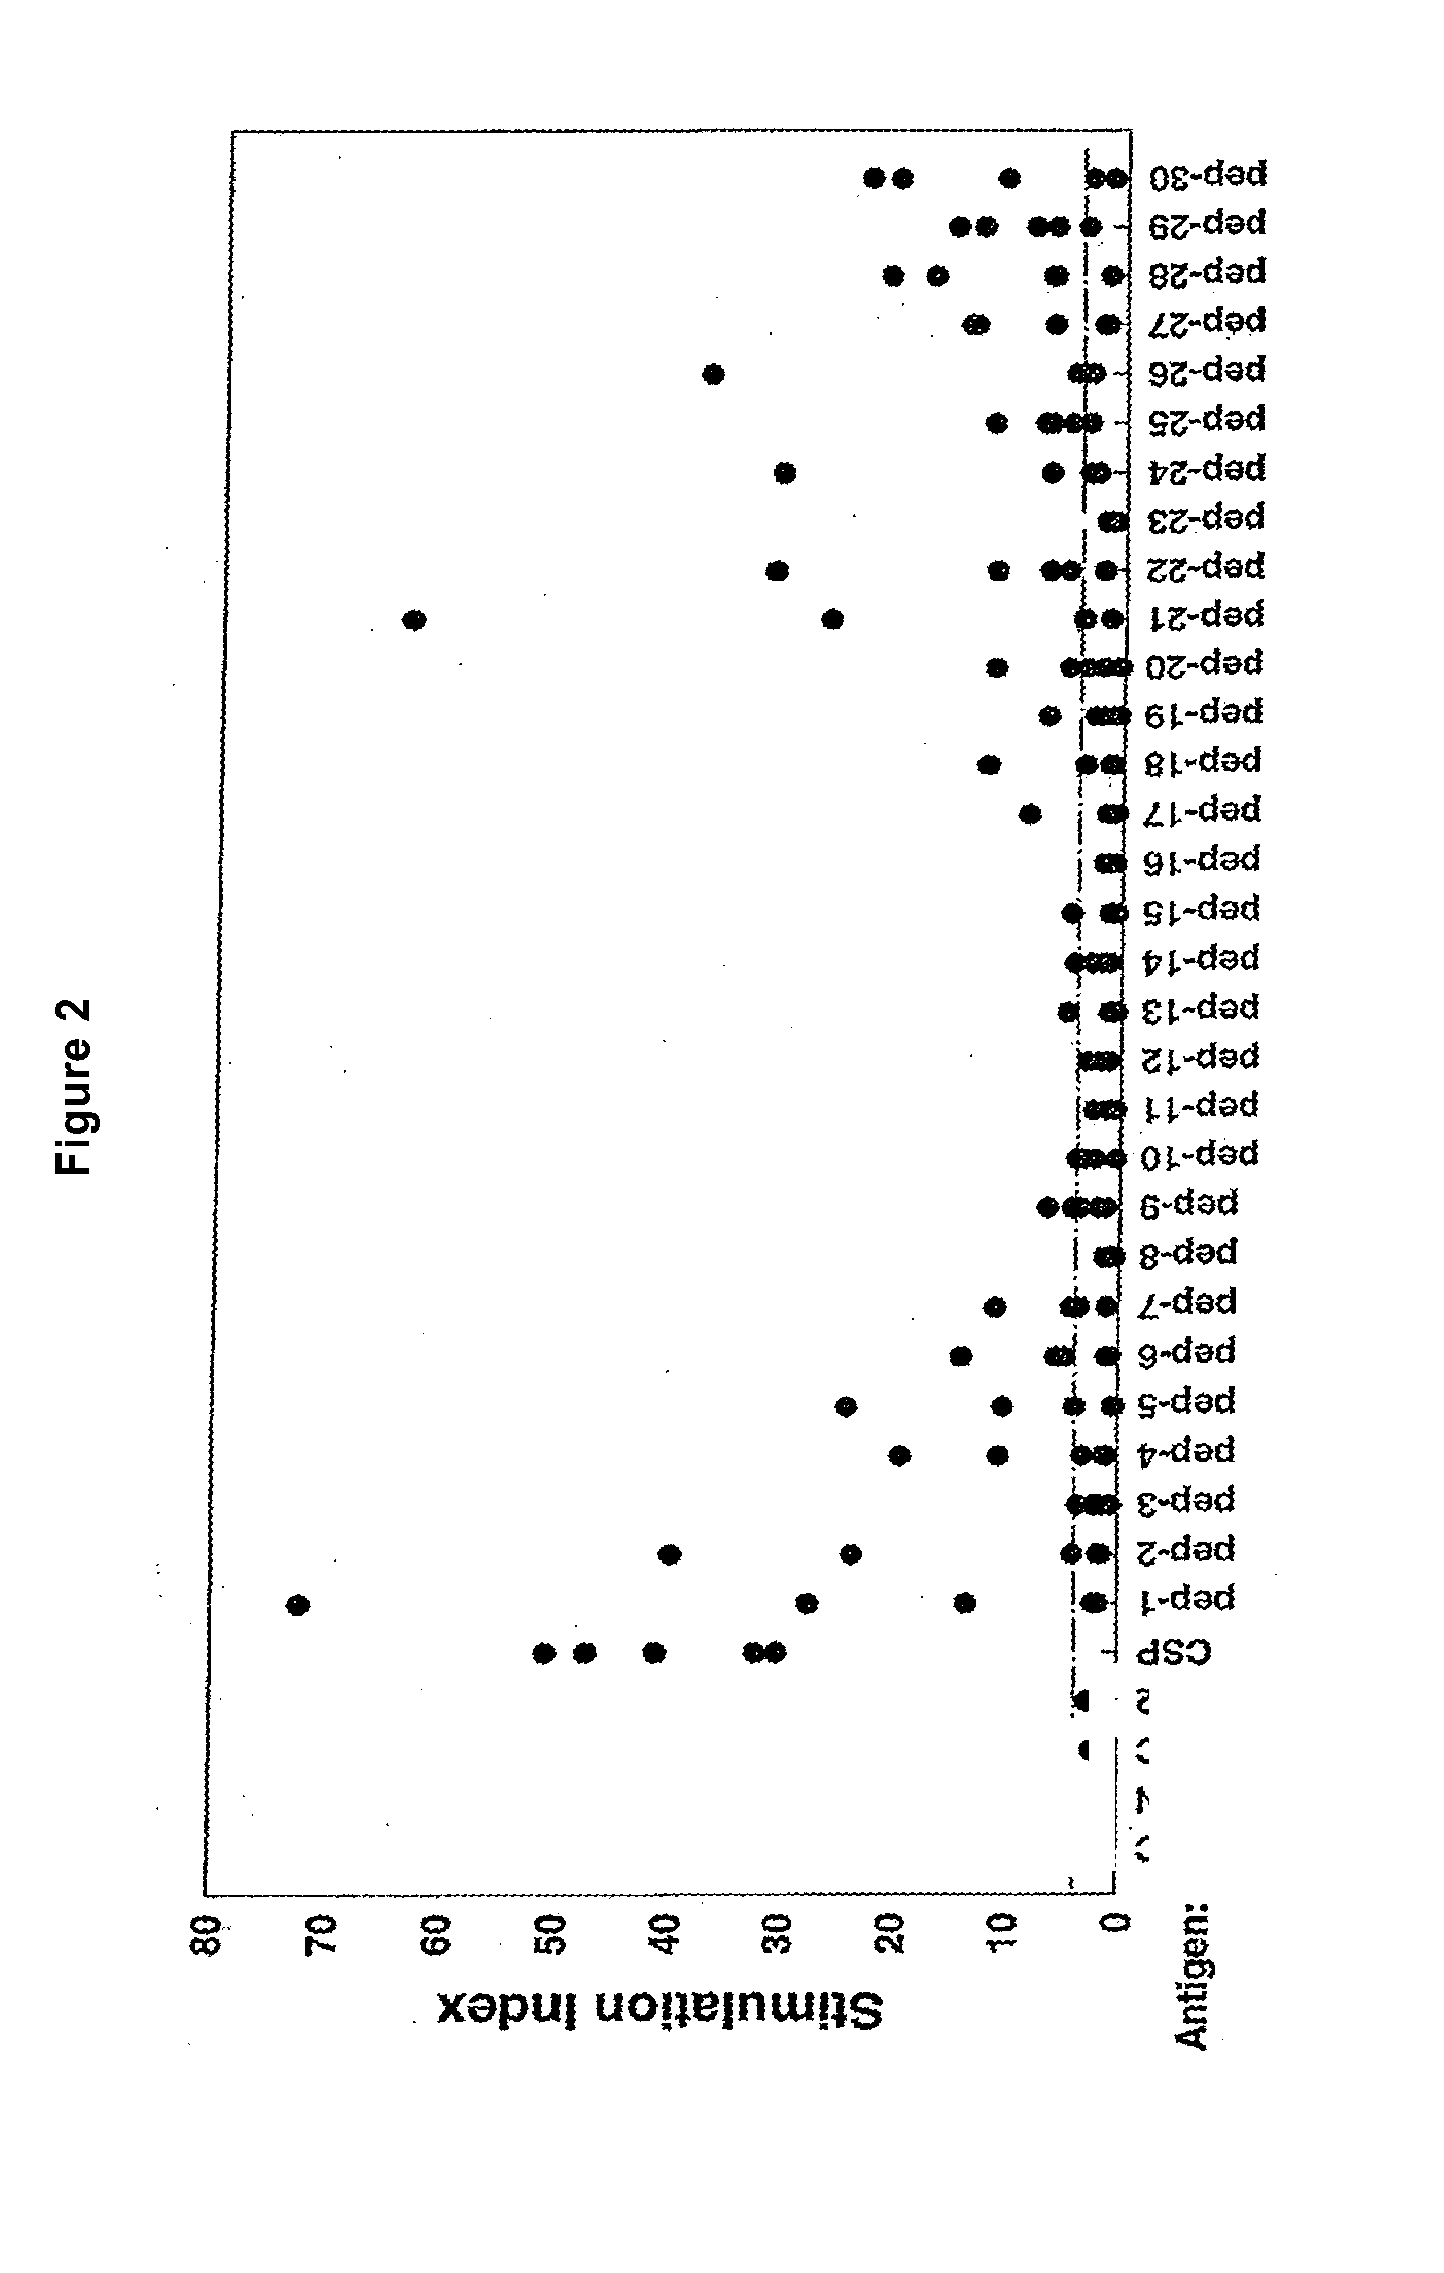 Novel compositions and methods